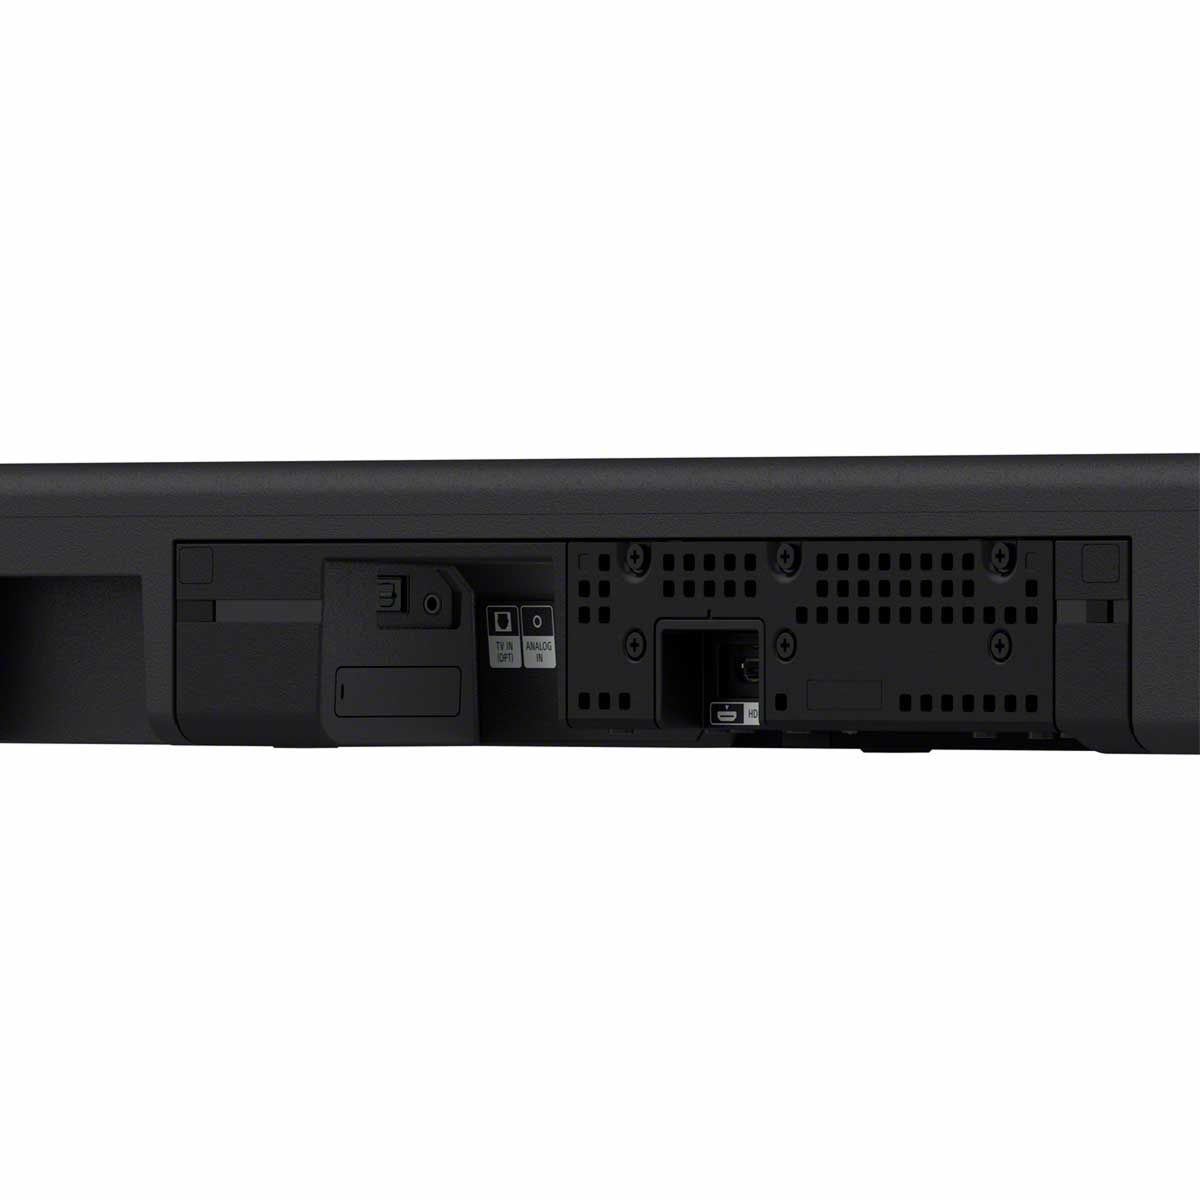 Sony HT-A7000 Dolby Atmos Soundbar, rear detailed view of inputs/outputs